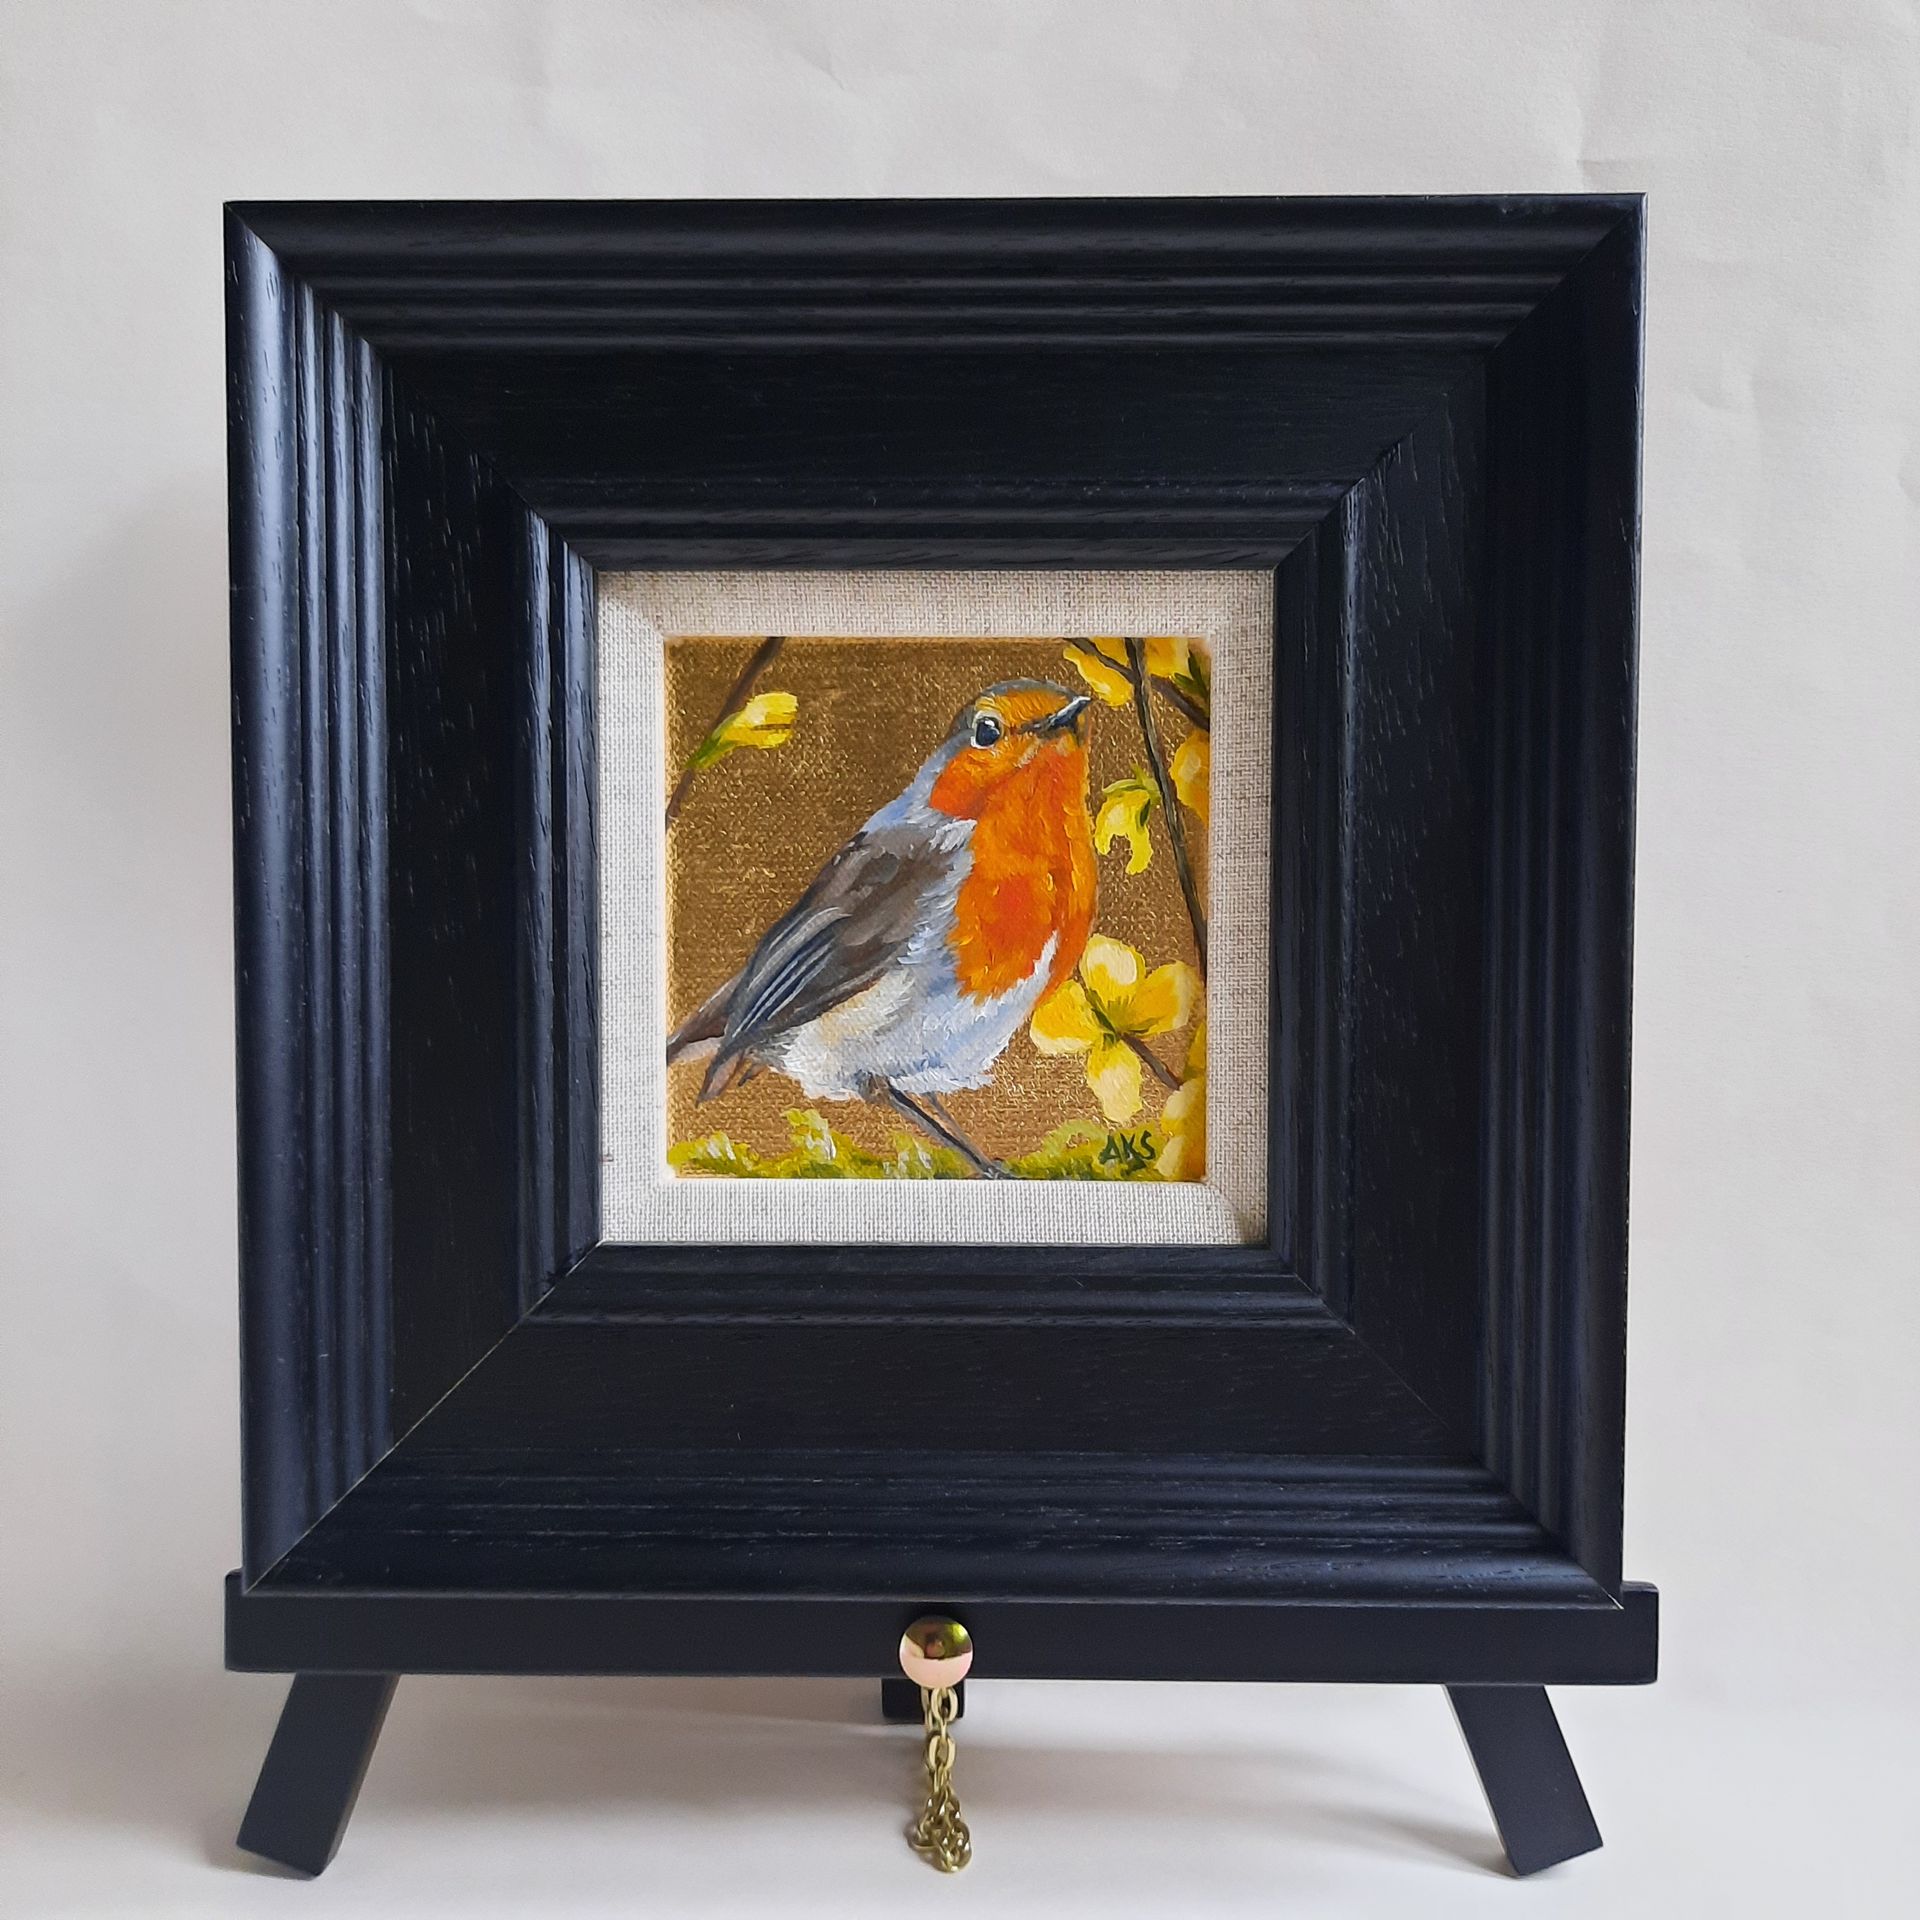 An oil painting of a red breasted Robin bird perched on a twig, surrounded by bright yellow Forsythia flowers. The painting is on shiny gold leaf and is shown framed in a black frame on a black mini easel